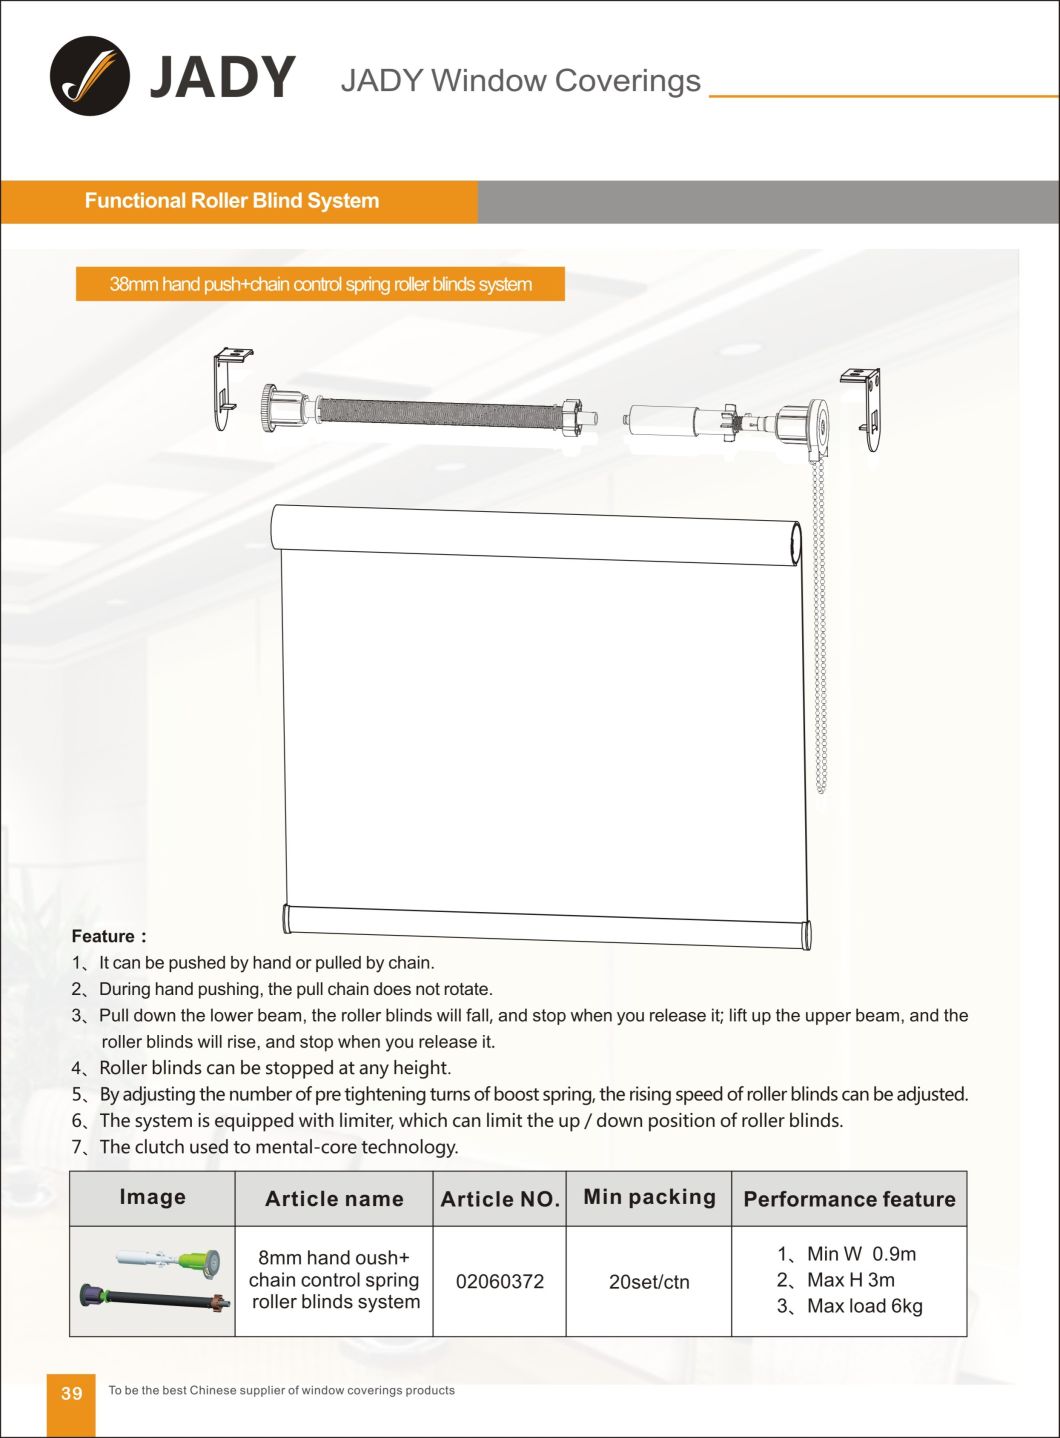 Hand-Pushing Roller Blinds Components, Cordless System, Spring Roller Blinds